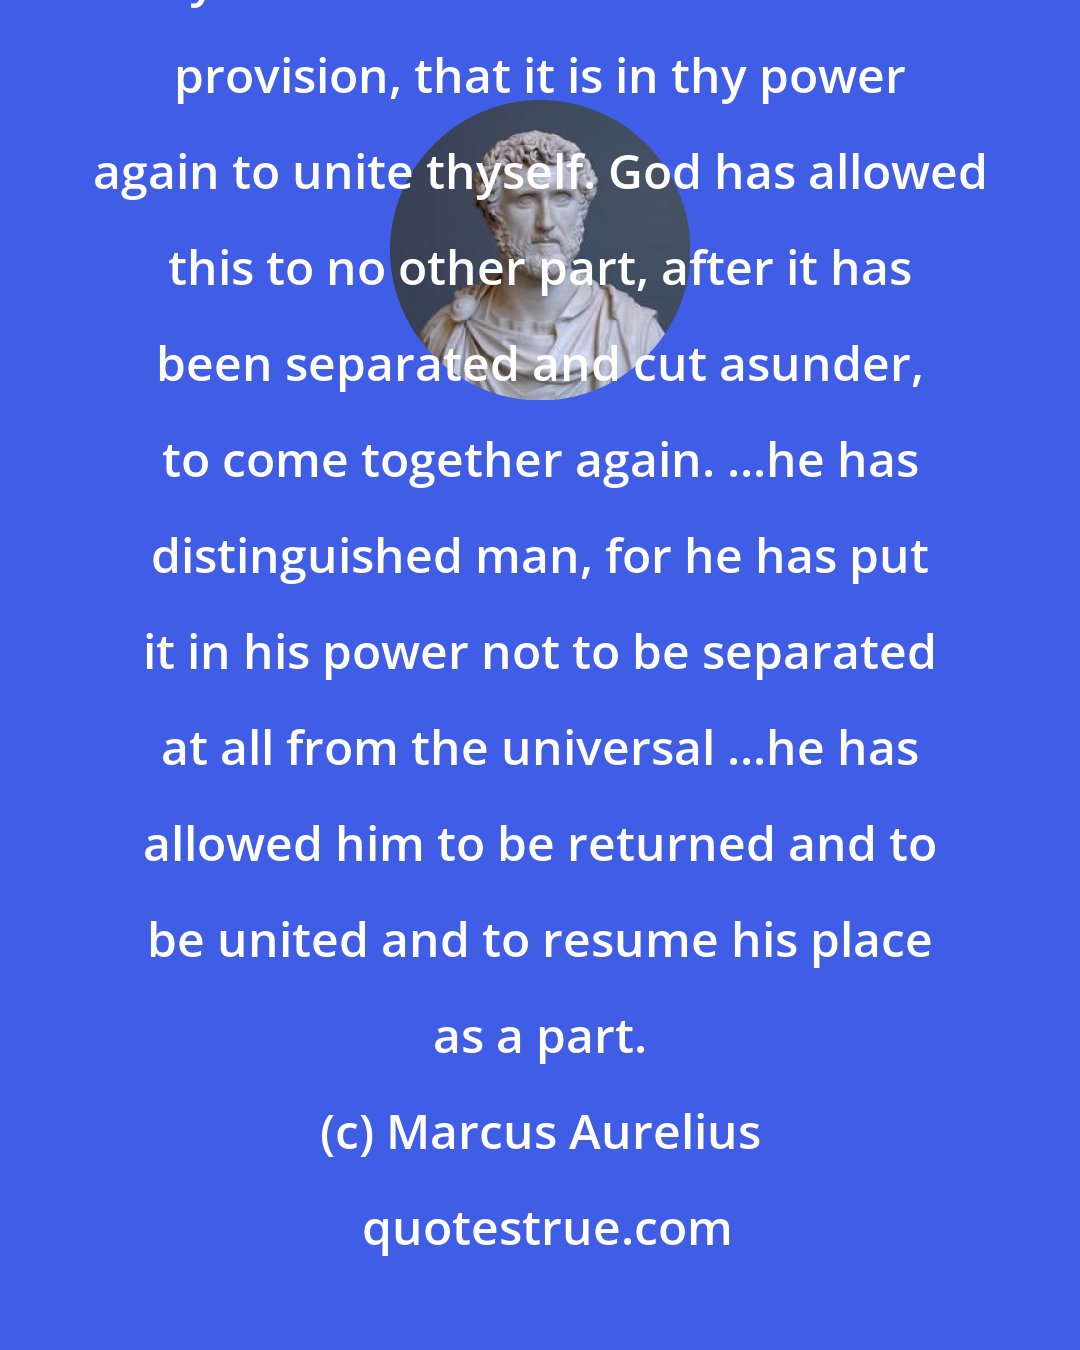 Marcus Aurelius: Suppose that thou hast detached thyself from the natural unity... yet here there is this beautiful provision, that it is in thy power again to unite thyself. God has allowed this to no other part, after it has been separated and cut asunder, to come together again. ...he has distinguished man, for he has put it in his power not to be separated at all from the universal ...he has allowed him to be returned and to be united and to resume his place as a part.